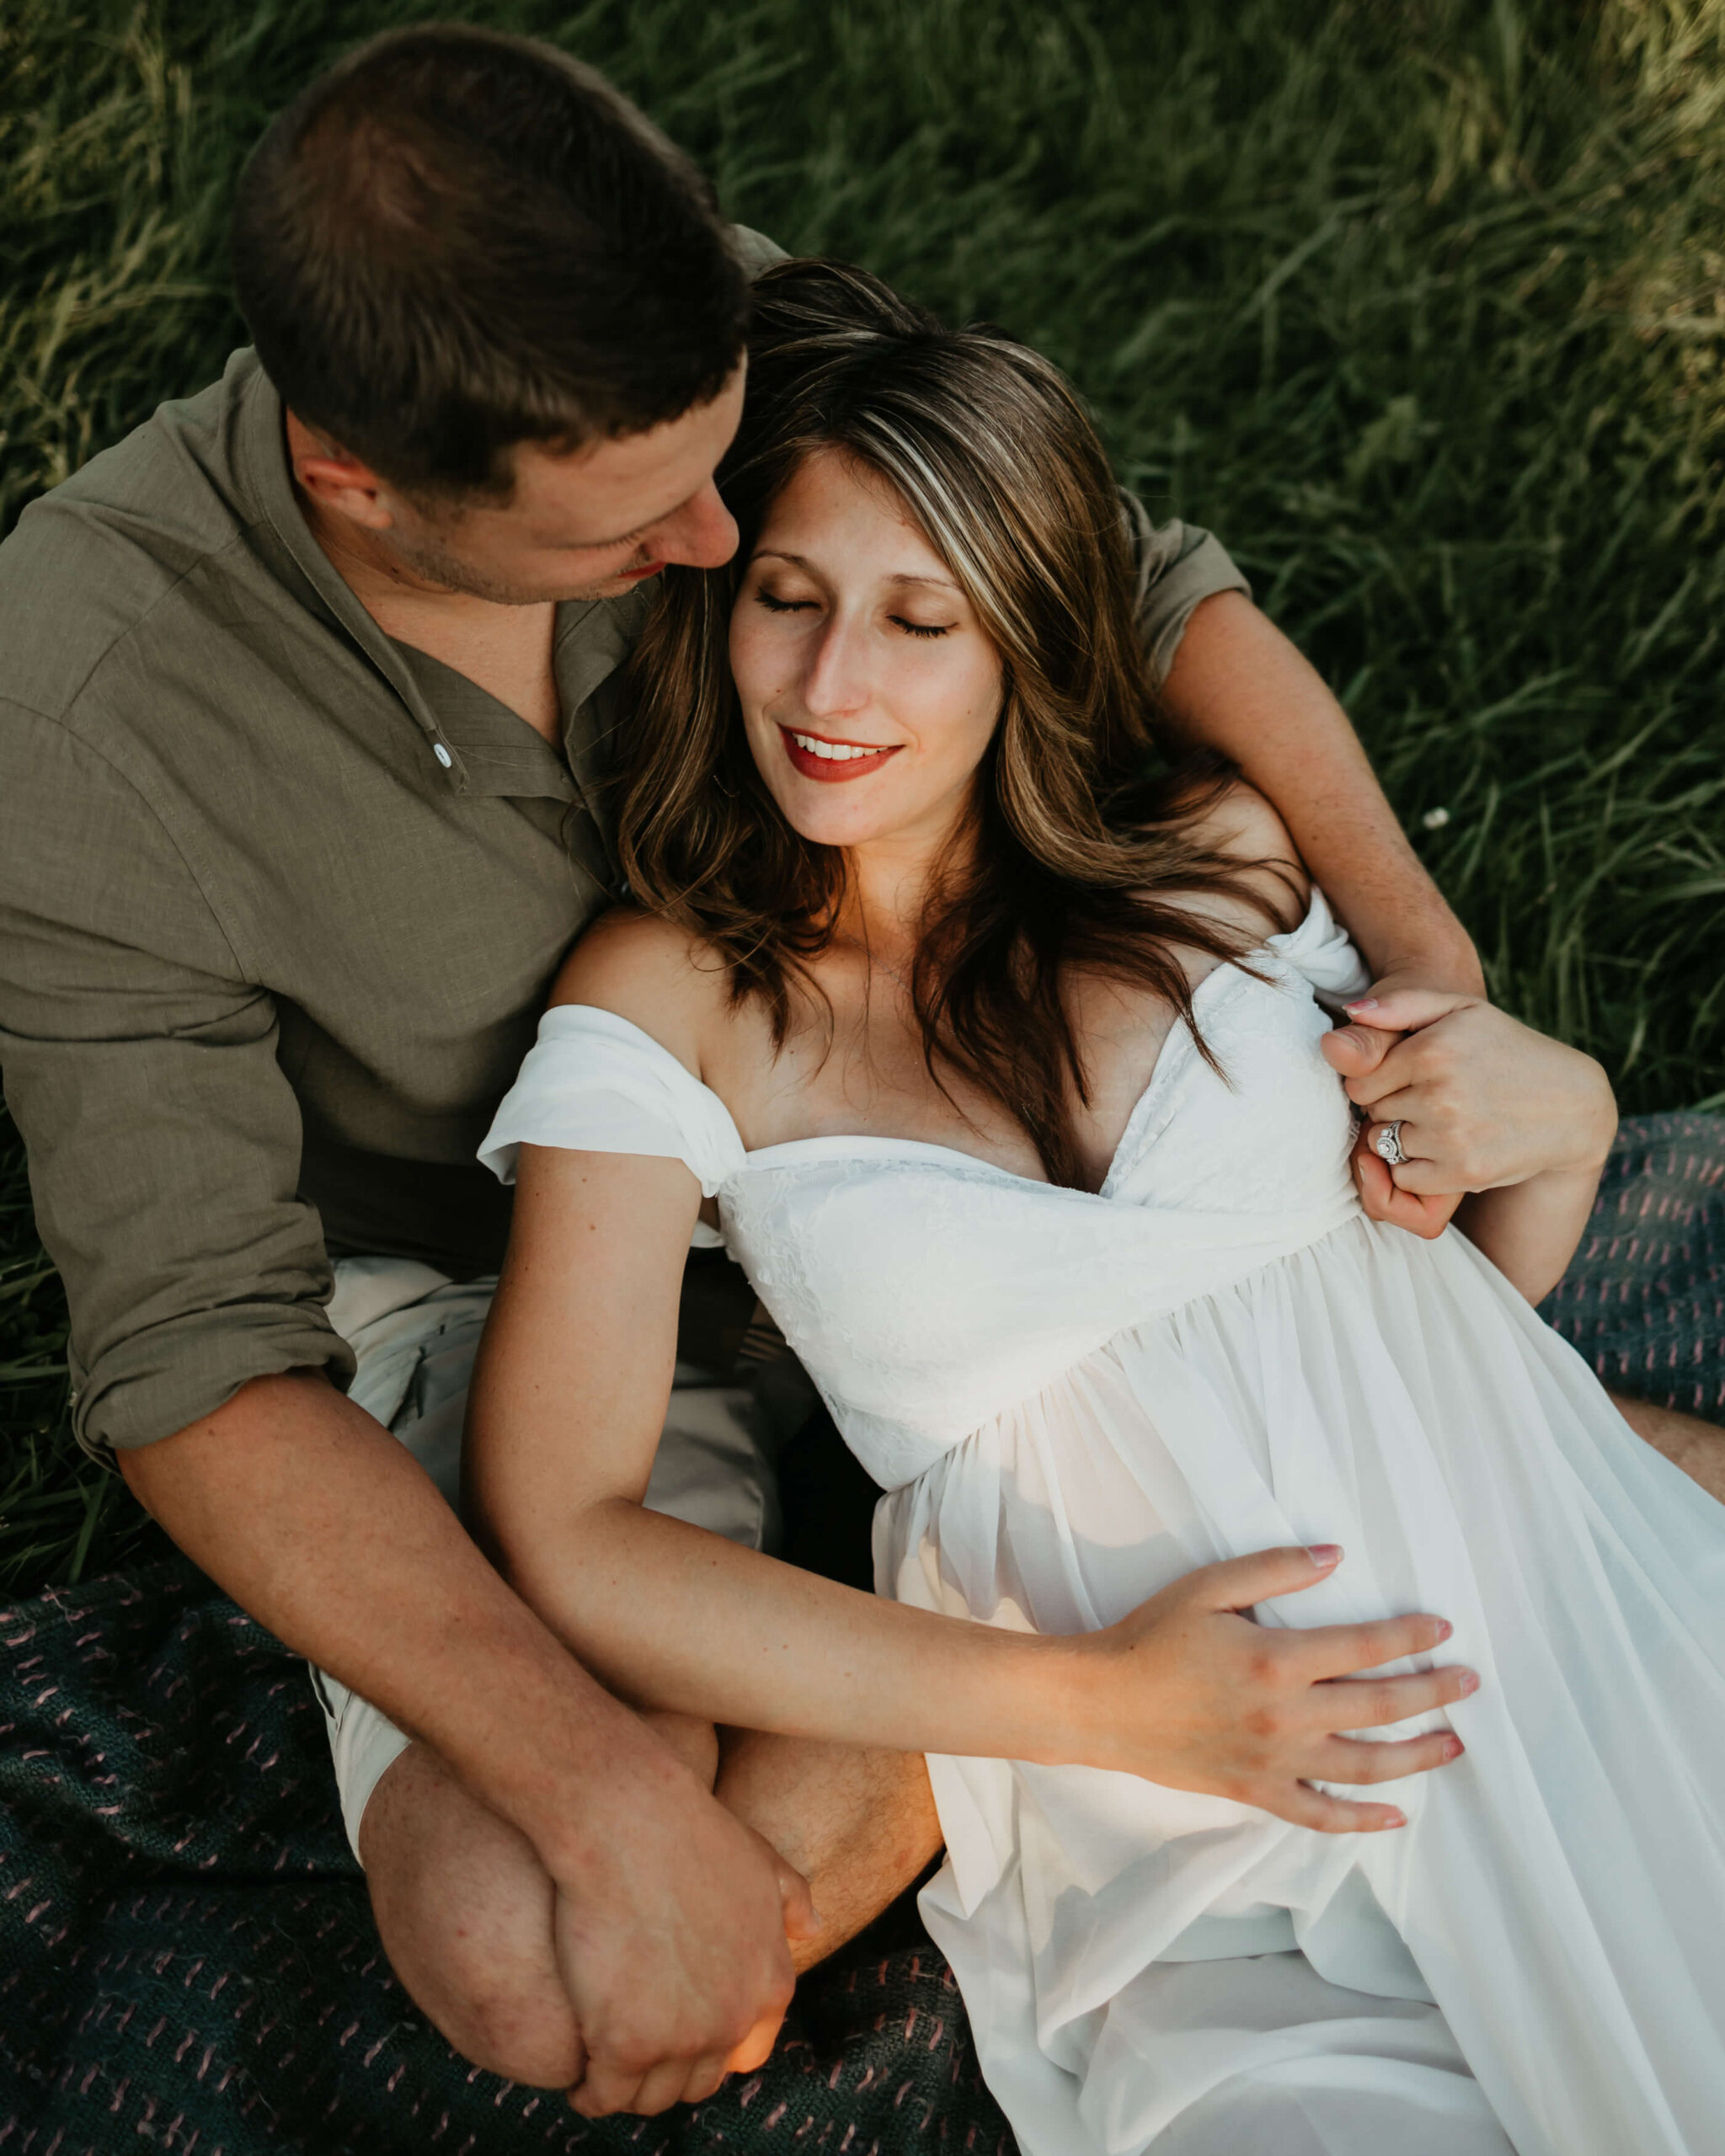 A mom to be lays in the lap of her husband on a picnic blanket in some grass